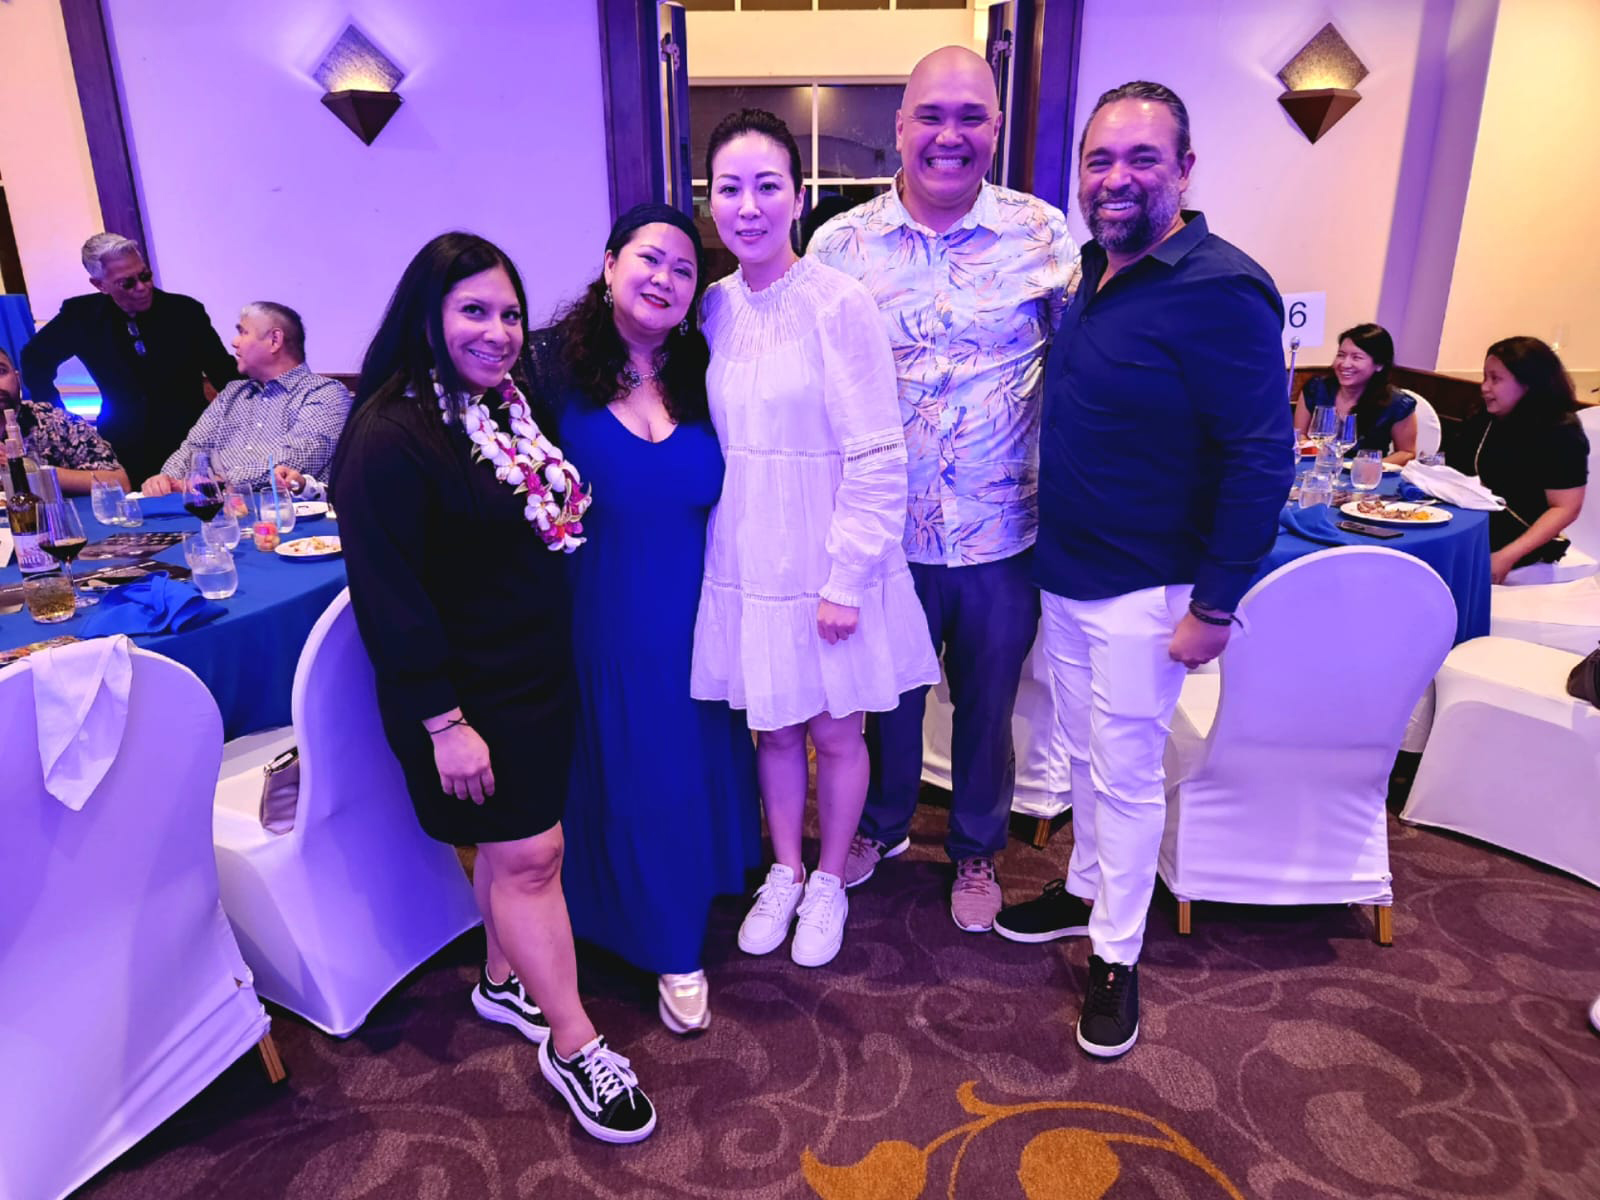 (From left) Jodee C. Duenas, 2023 president of Guam Association of Realtors, and principal broker and realtor of Hafa Adai Realty; Peggy A. Llagas, CEO, Guam Association of Realtors; Karen Pan, 2023 vice president and treasurer of Guam Association of Realtors, and principal broker, Ideal Realty Guam; Shawn R.S. Blas, principal broker and realtor, Remax Pacific Alliance Realty; and Bobby Sachdev, president, co-owner, and principal broker, Landmark Realty Group &amp; Services LLC. 